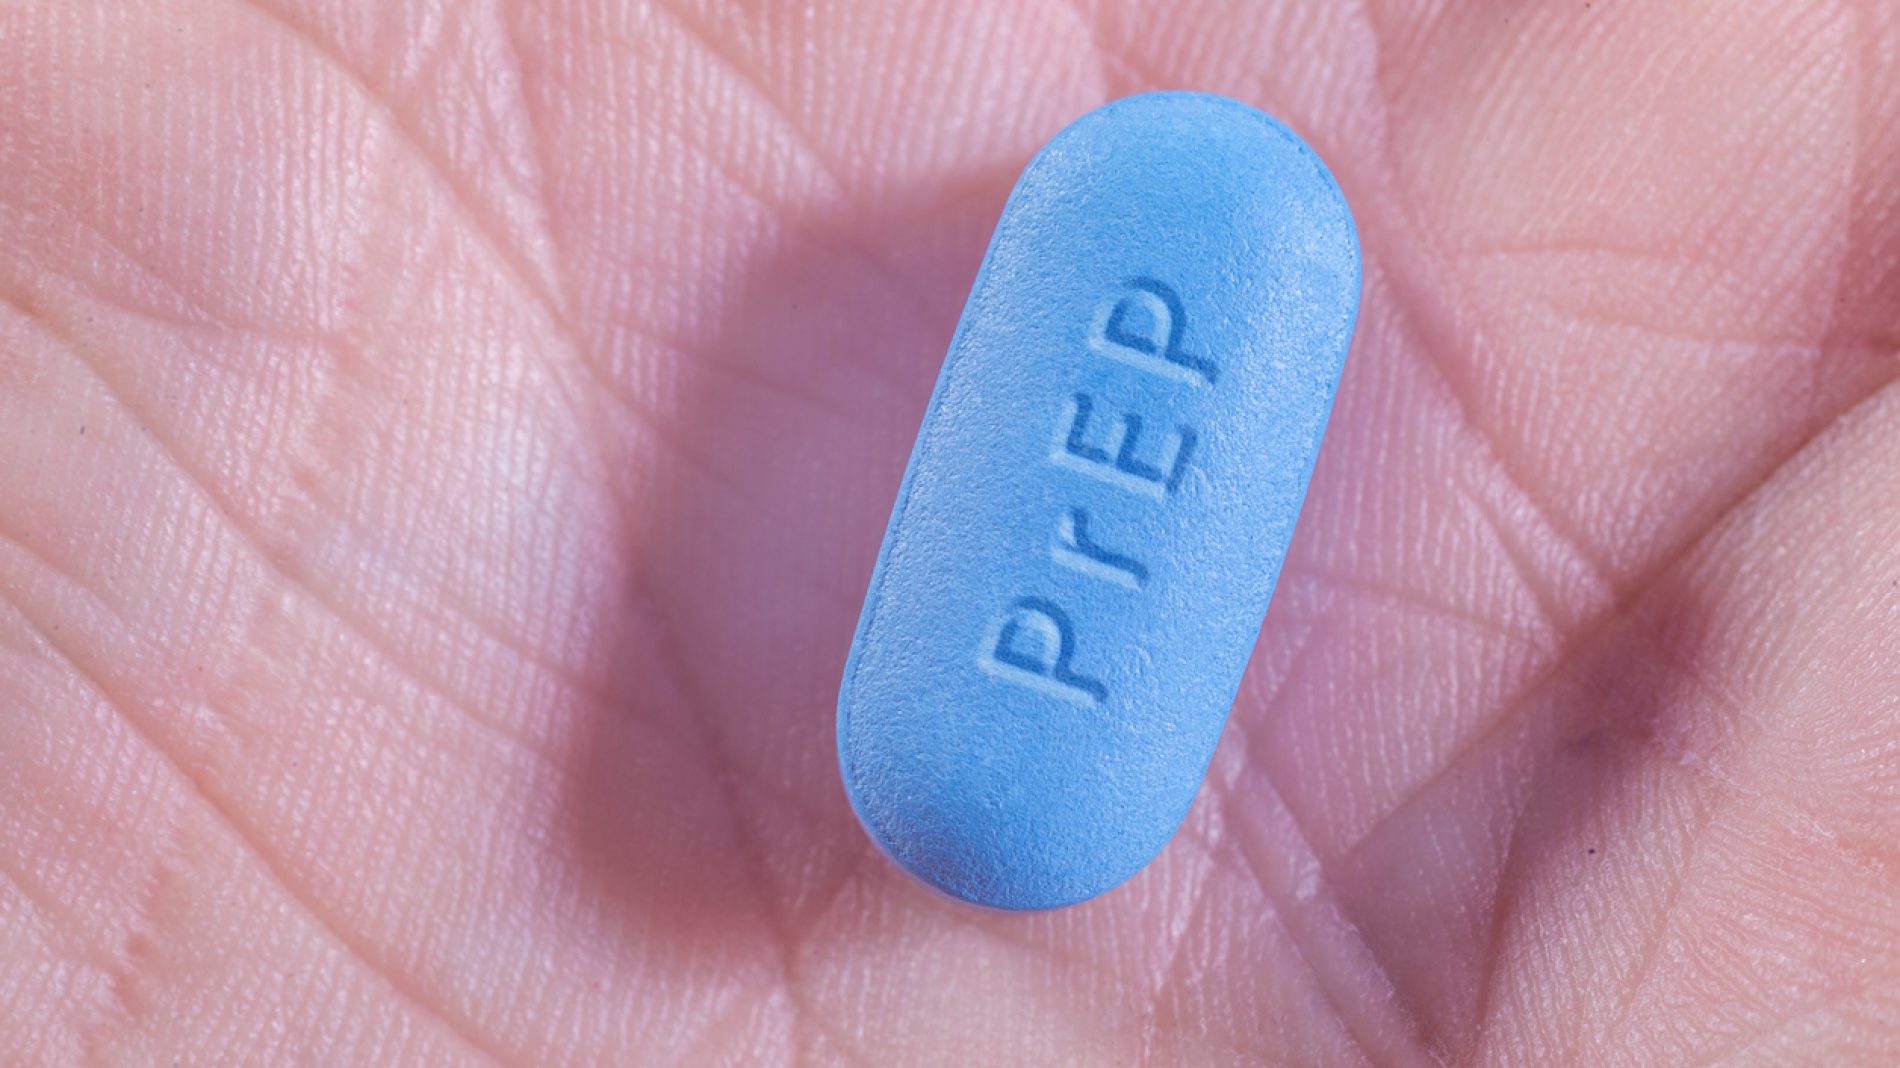 Pills for Pre-Exposure Prophylaxis (PrEP) to prevent HIV